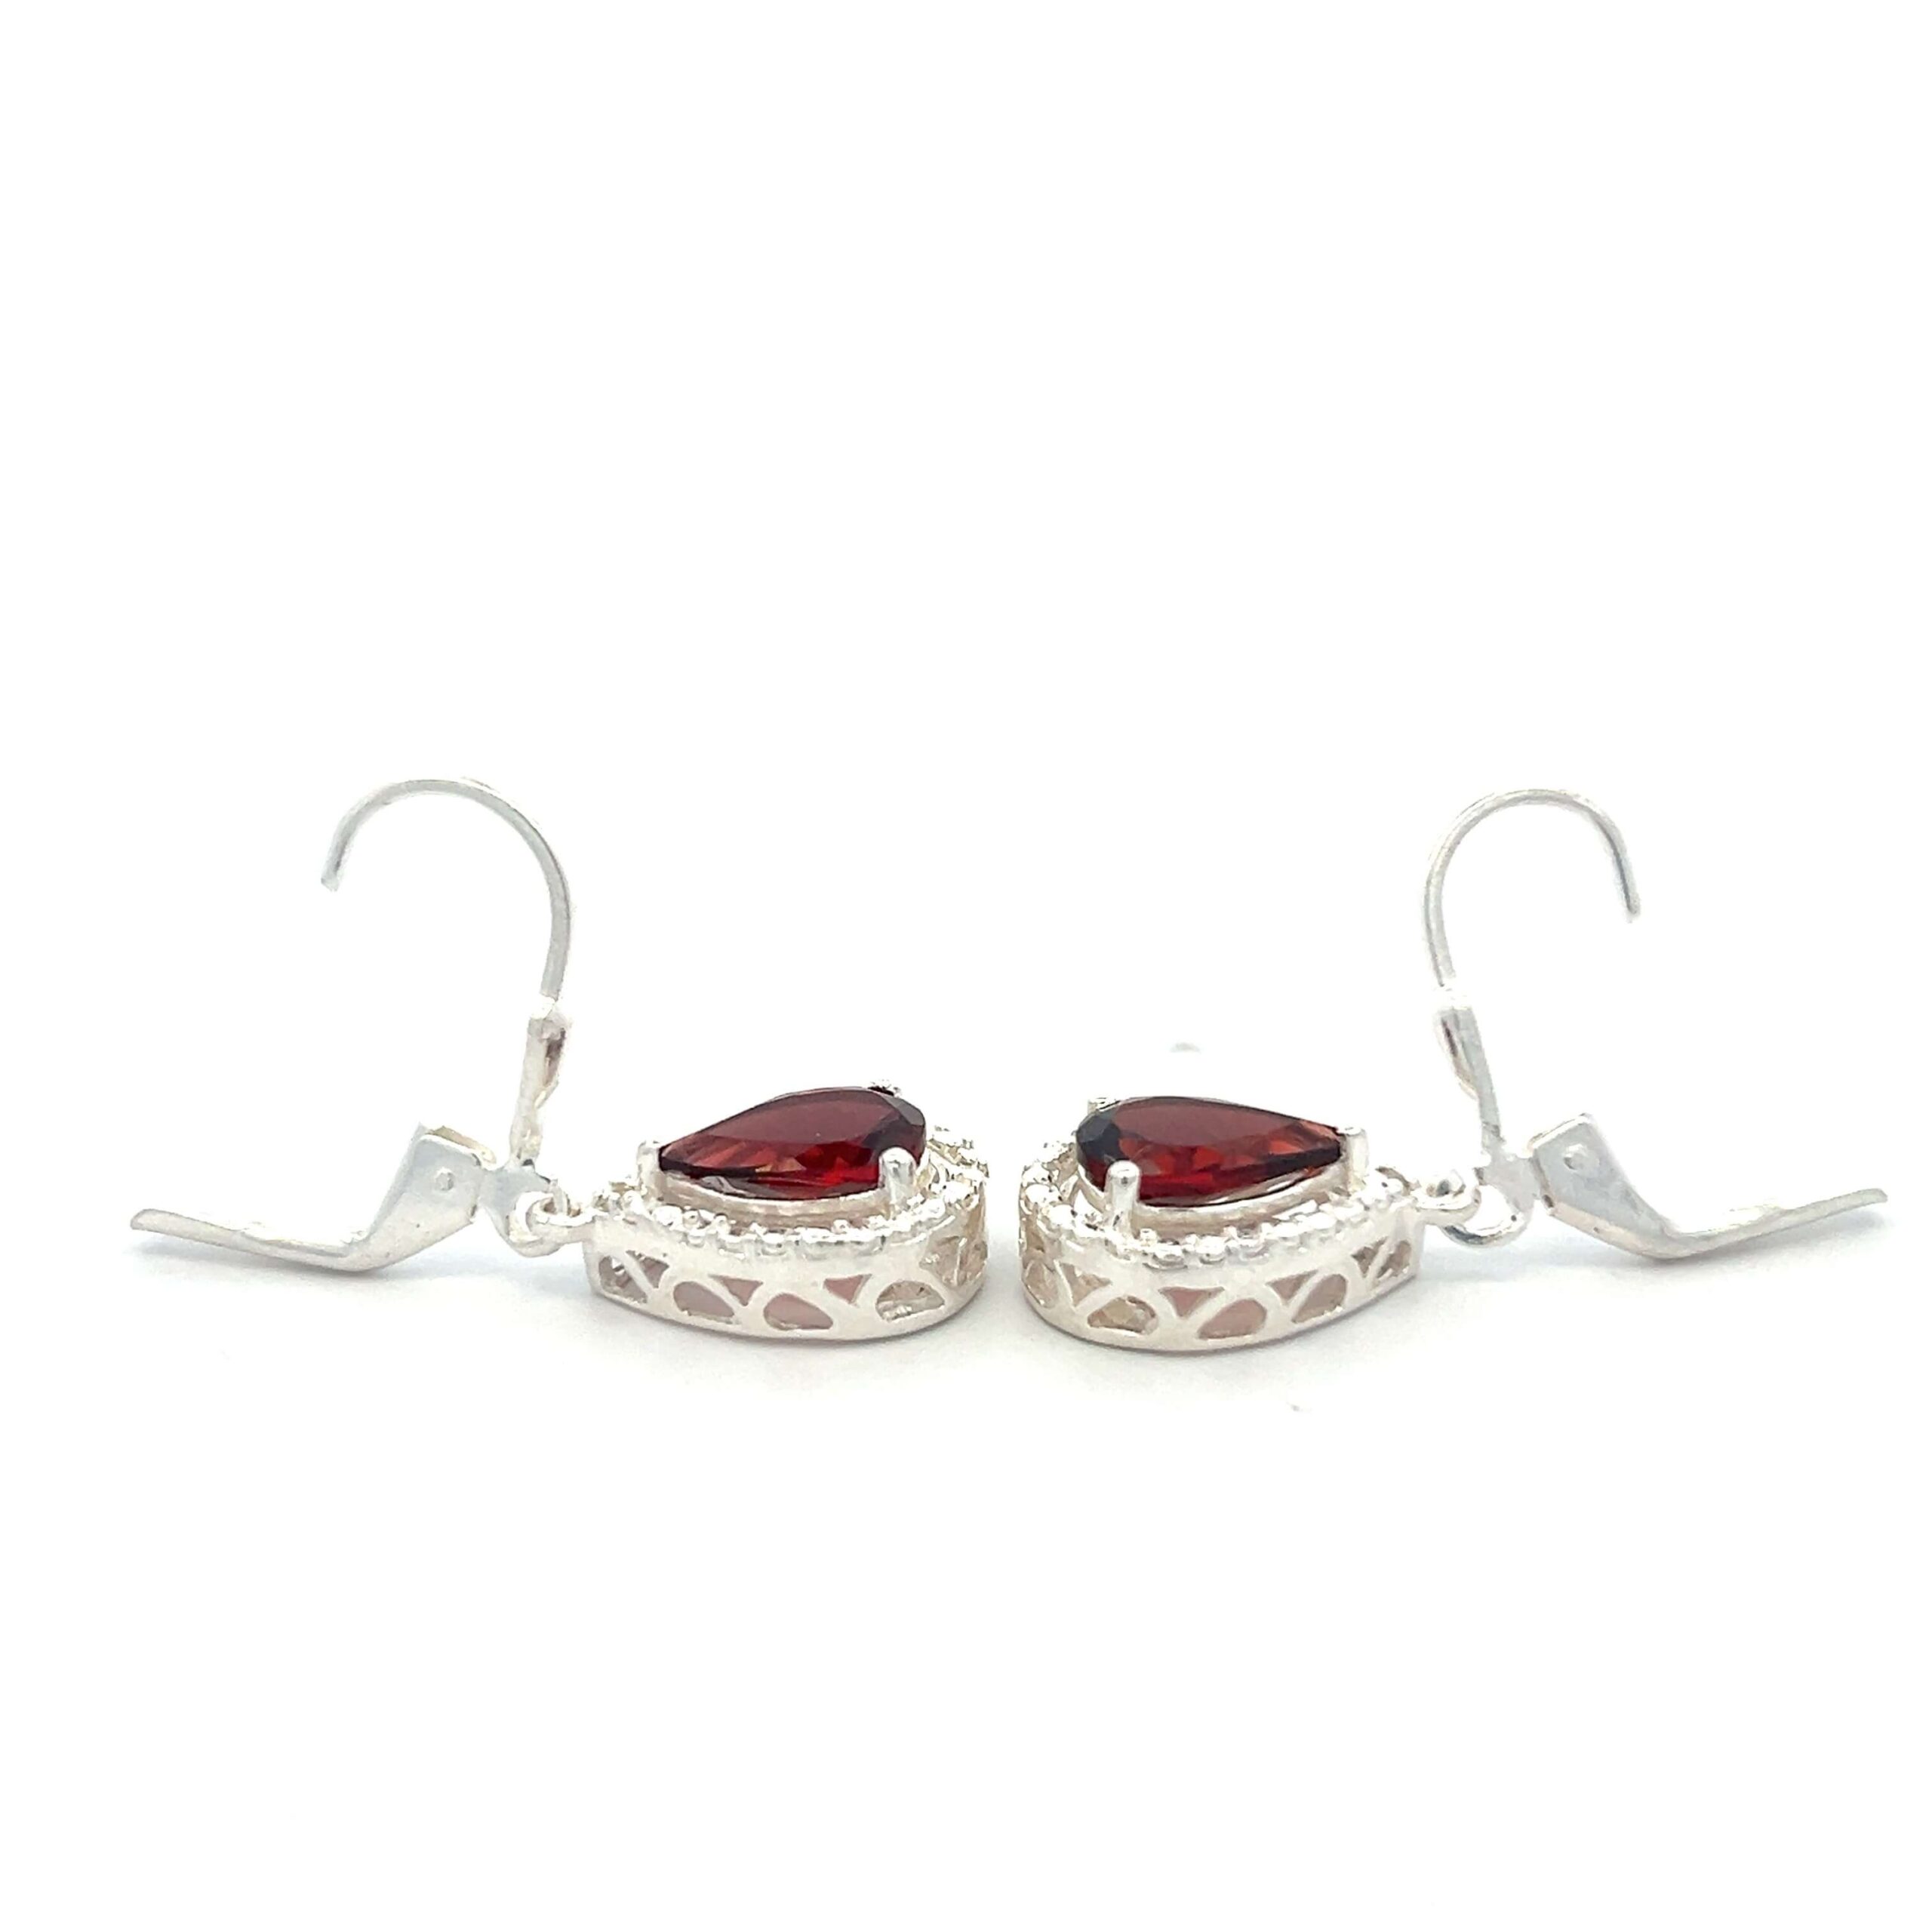 One estate pair of sterling silver drop earrings with pear-shaped faceted garnets and textured silver halos